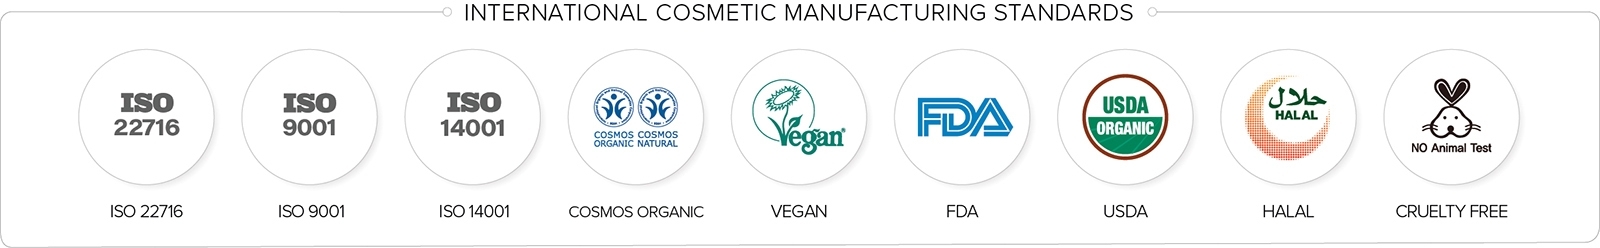 Manufacturing standards such as ISO22716, ISO9001, ISO14001, COSMOS ORGANIC, VEGAN, FDA, USDA, HALAL, CRUELTY FREE